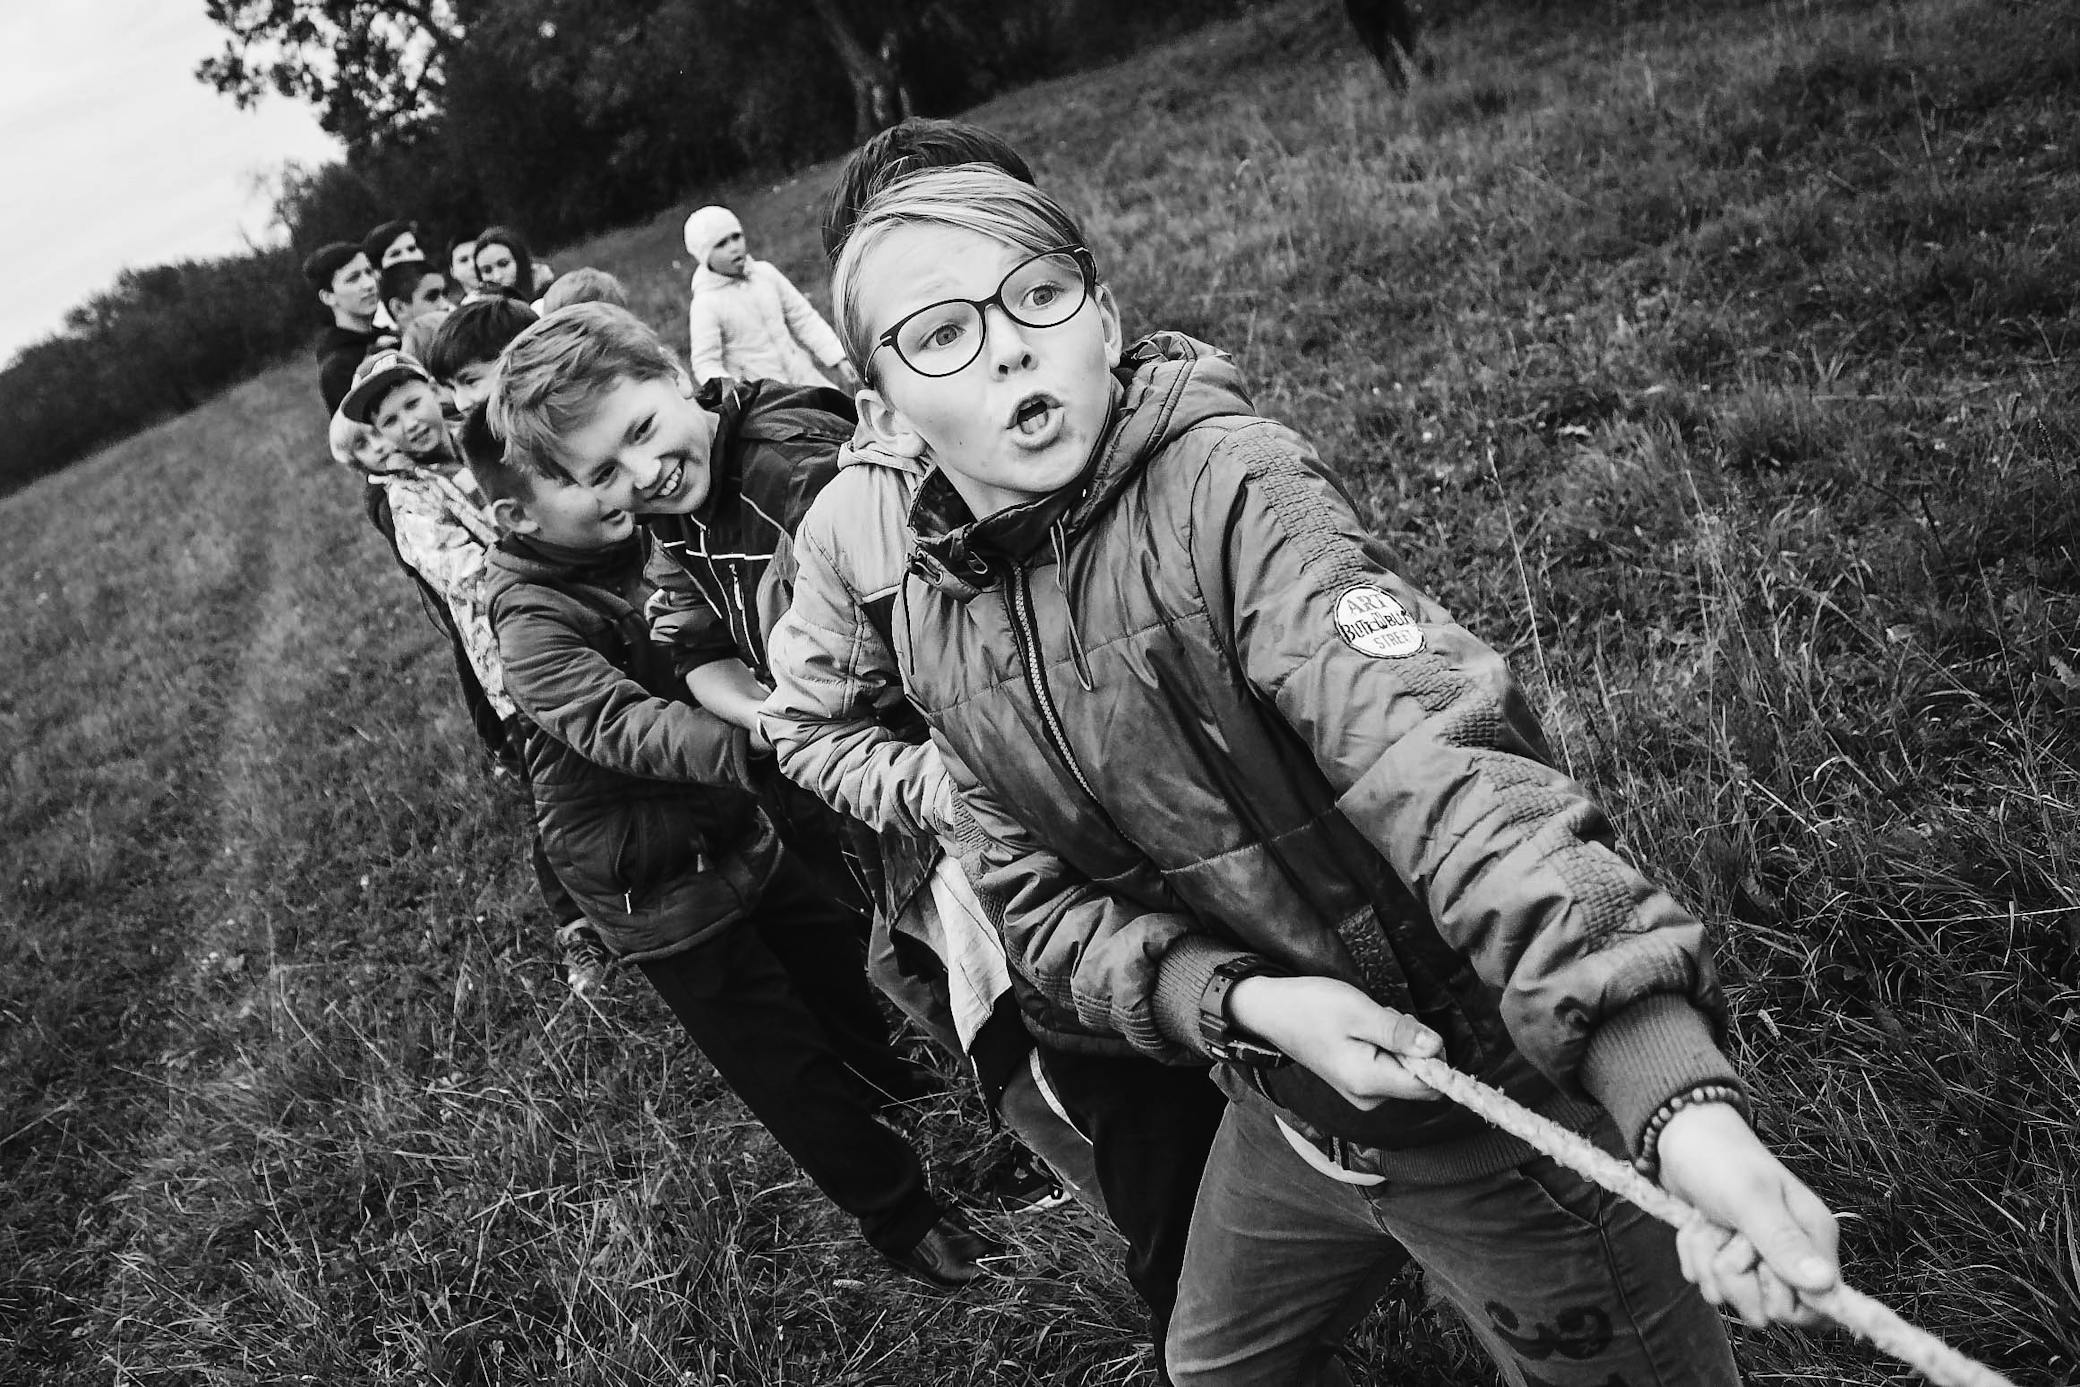 A group of children pull arope during a game of tug of war